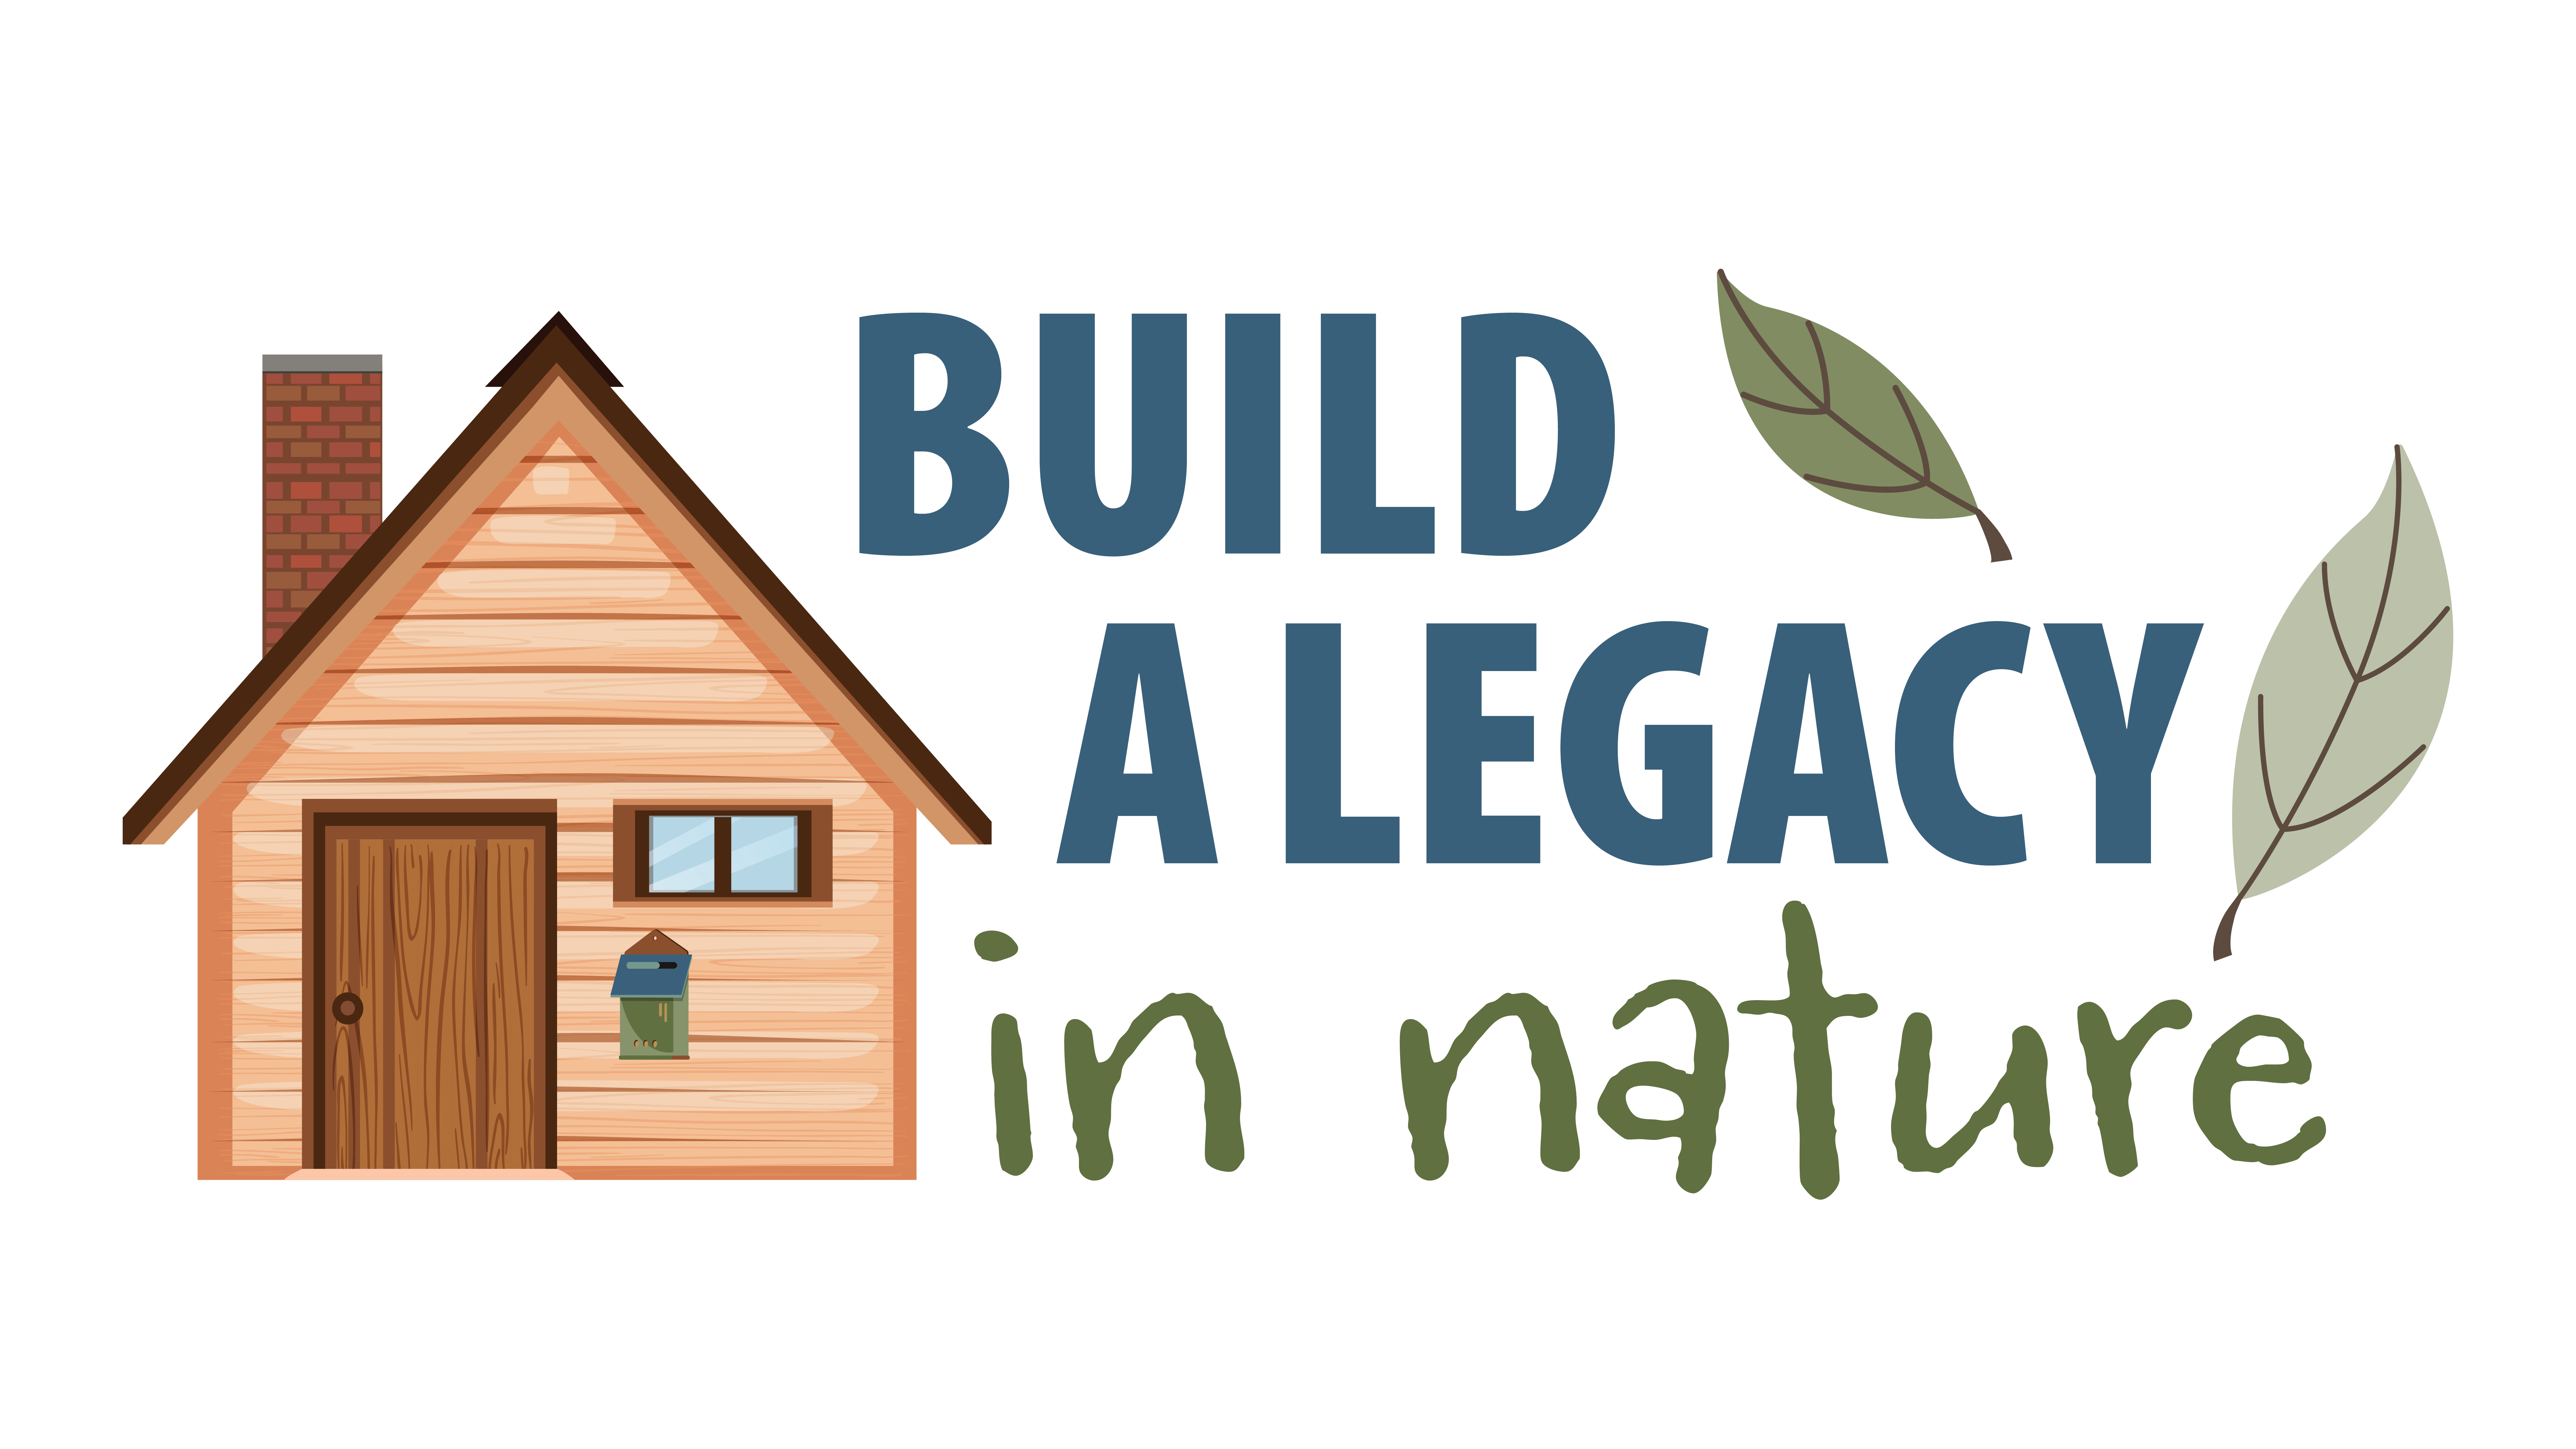 Build a legacy in nature